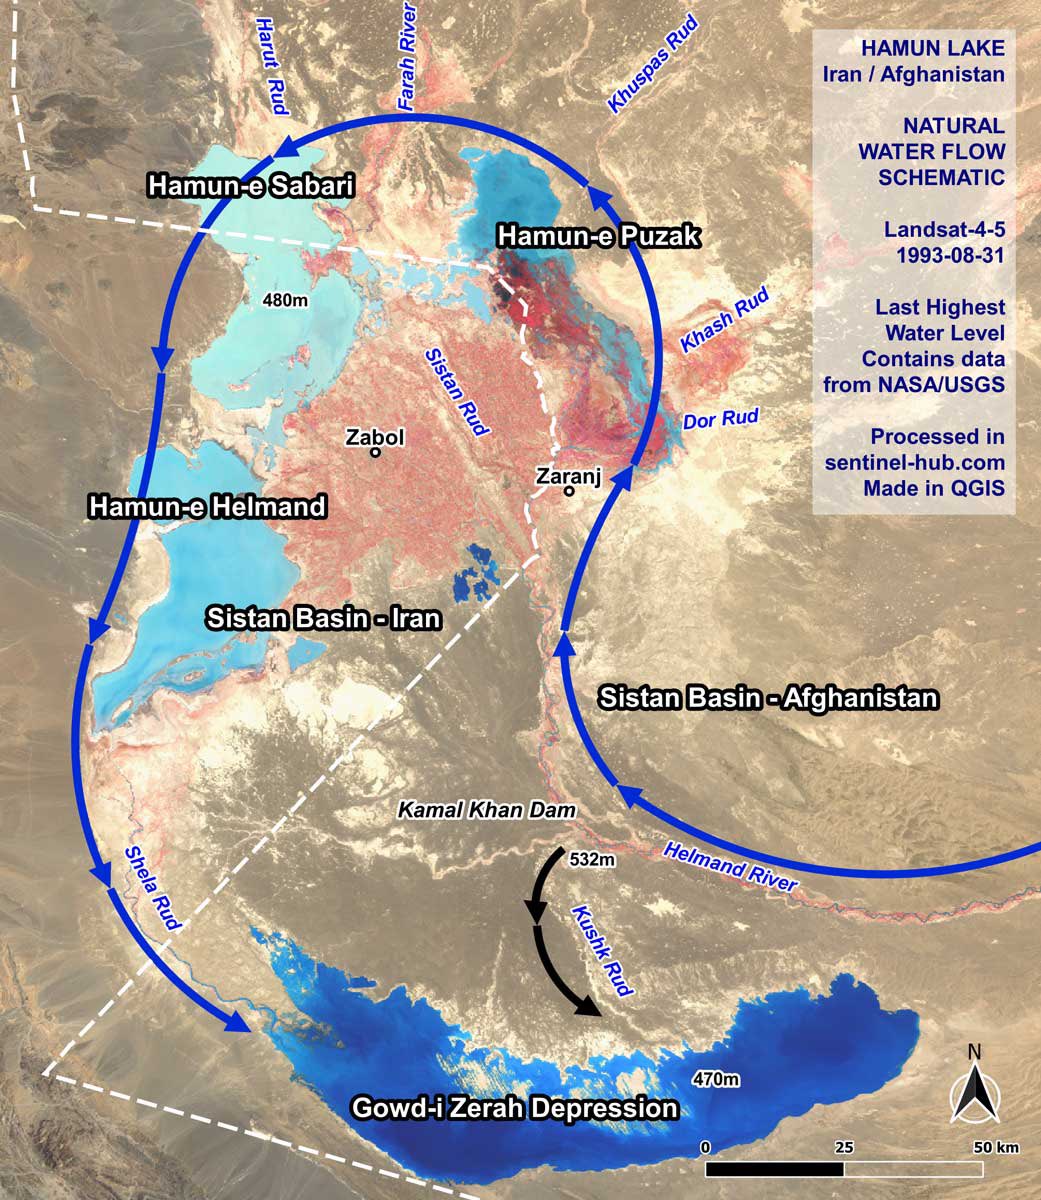 Afghanistan 🇦🇫🏳️& Iran 🇮🇷 Water Conflict has deep historical roots, but climate change has undeniably aggravated the situation. Here is the map of the water flow of Helmand/Sistan Basin. Where you can see how the flow normally goes.